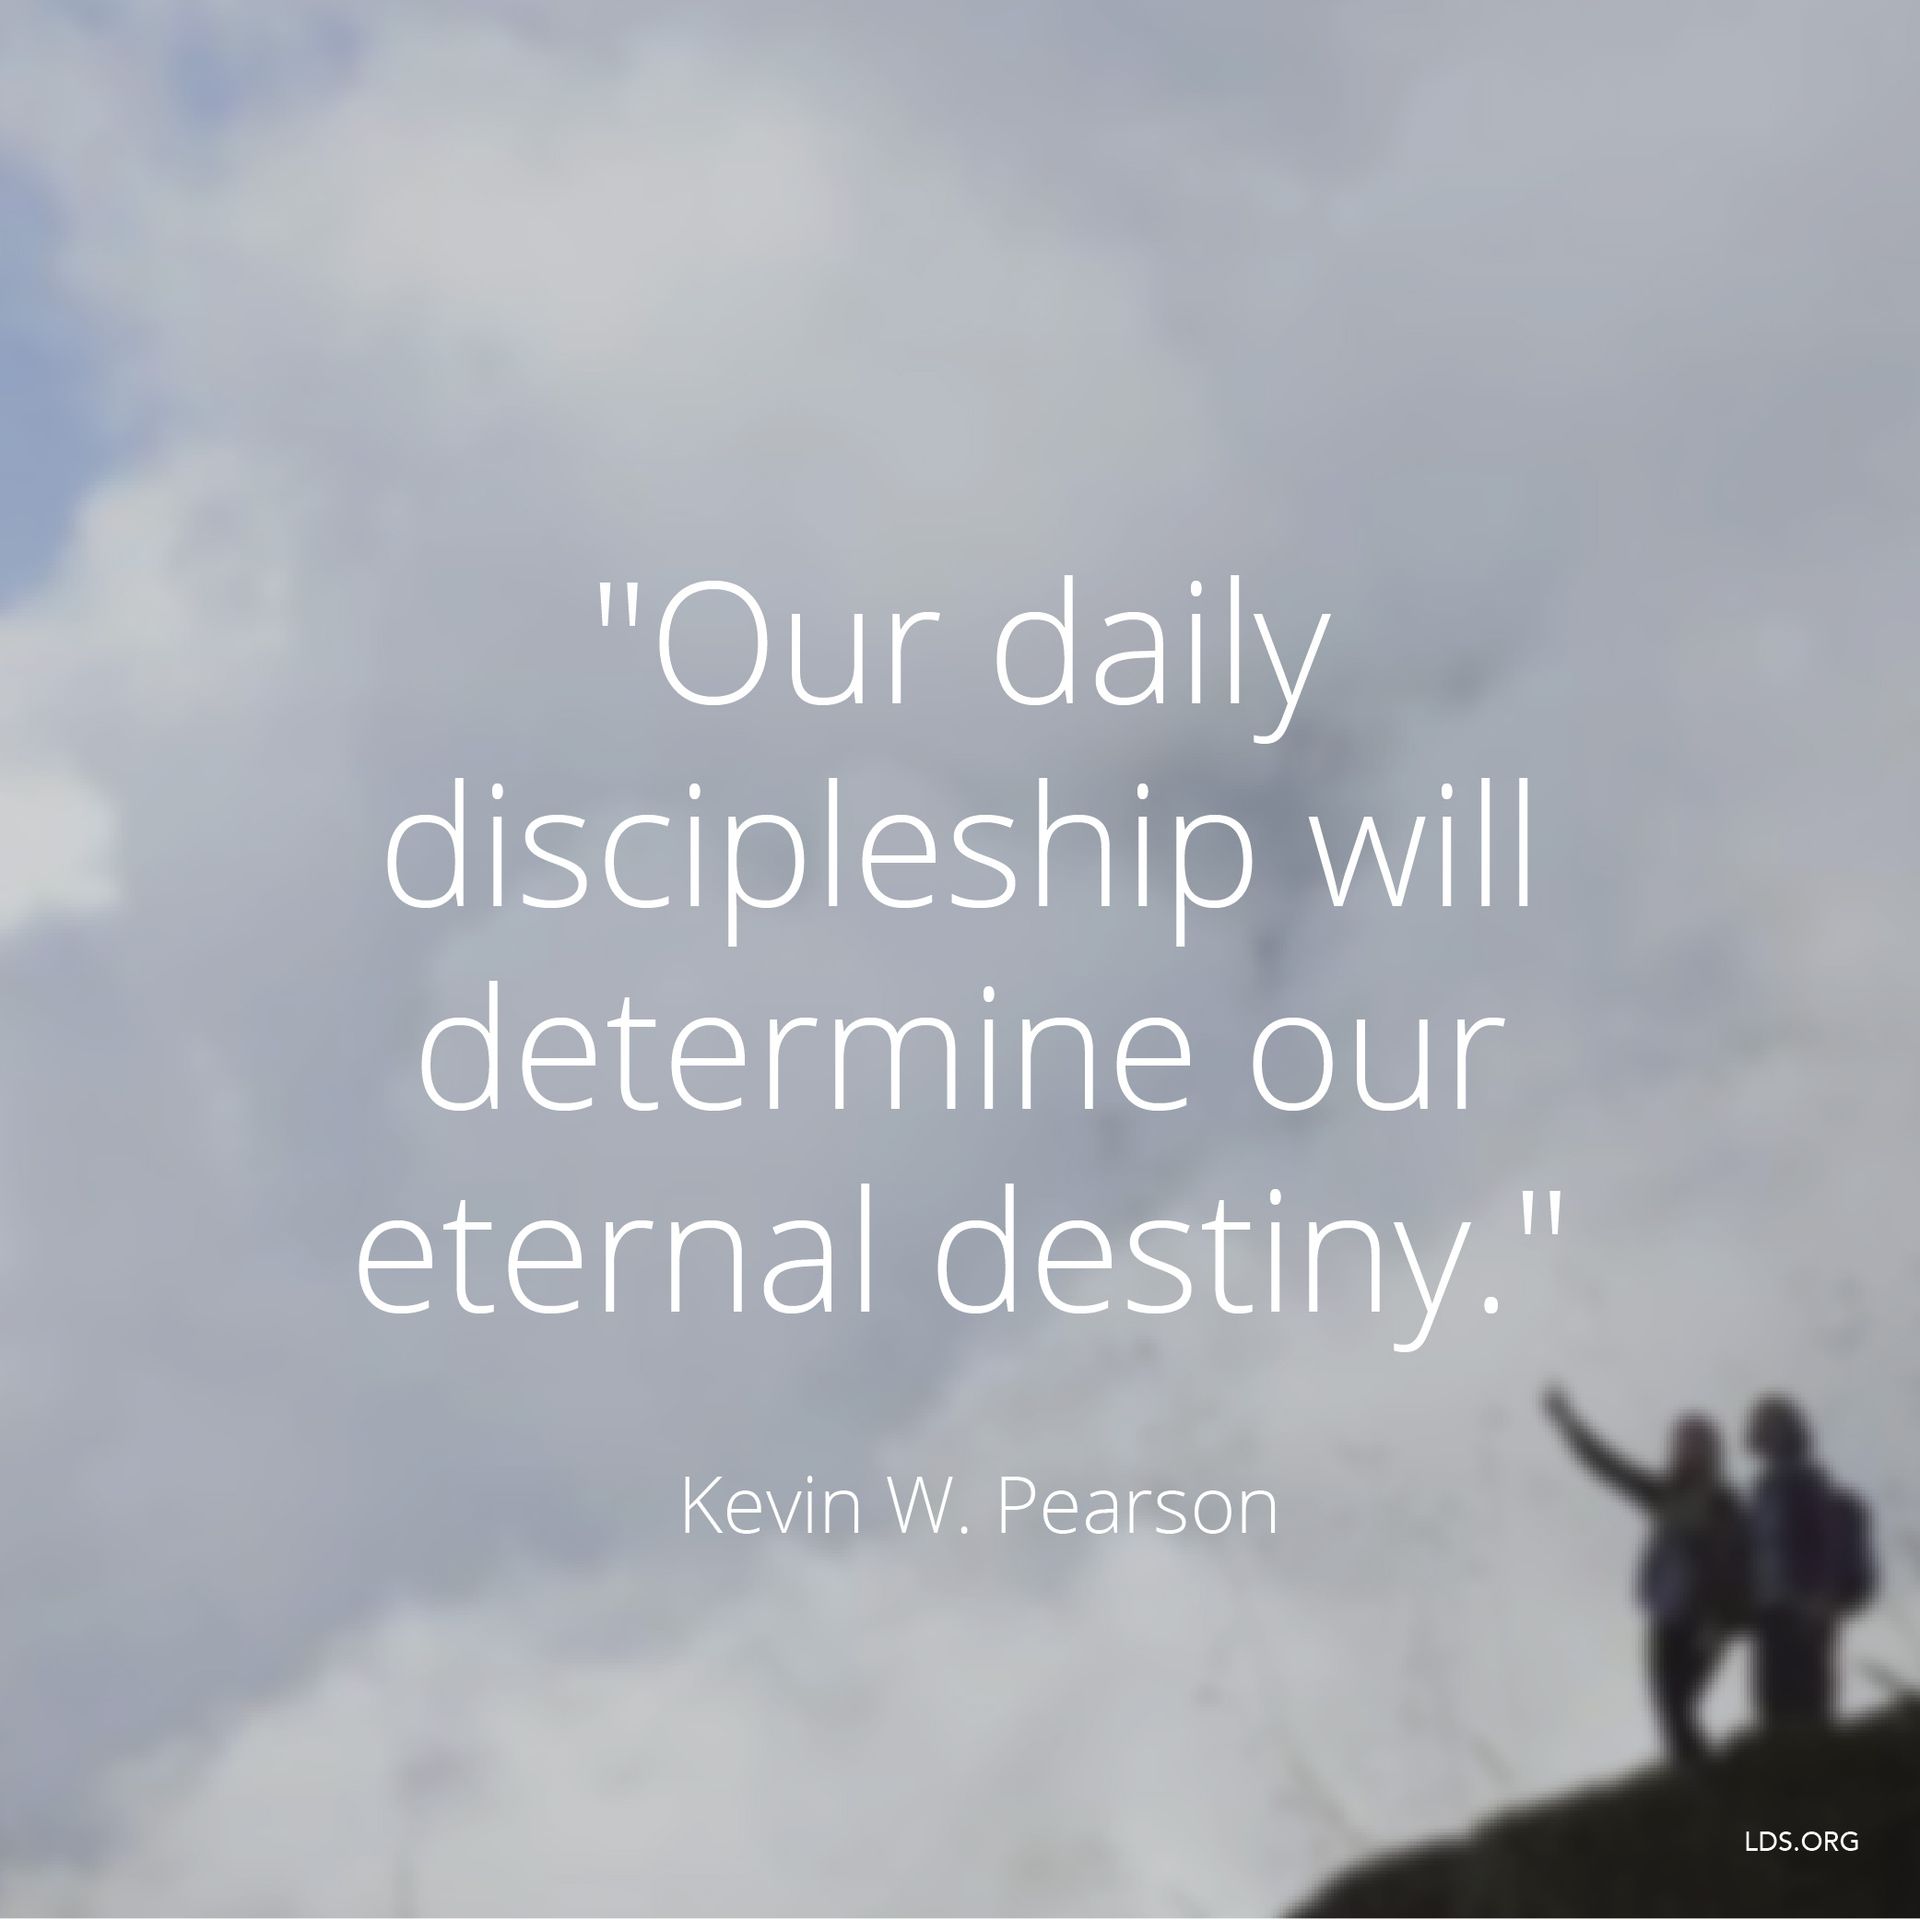 “Our daily discipleship will determine our eternal destiny.”—Elder Kevin W. Pearson, “Stay by the Tree” © undefined ipCode 1.